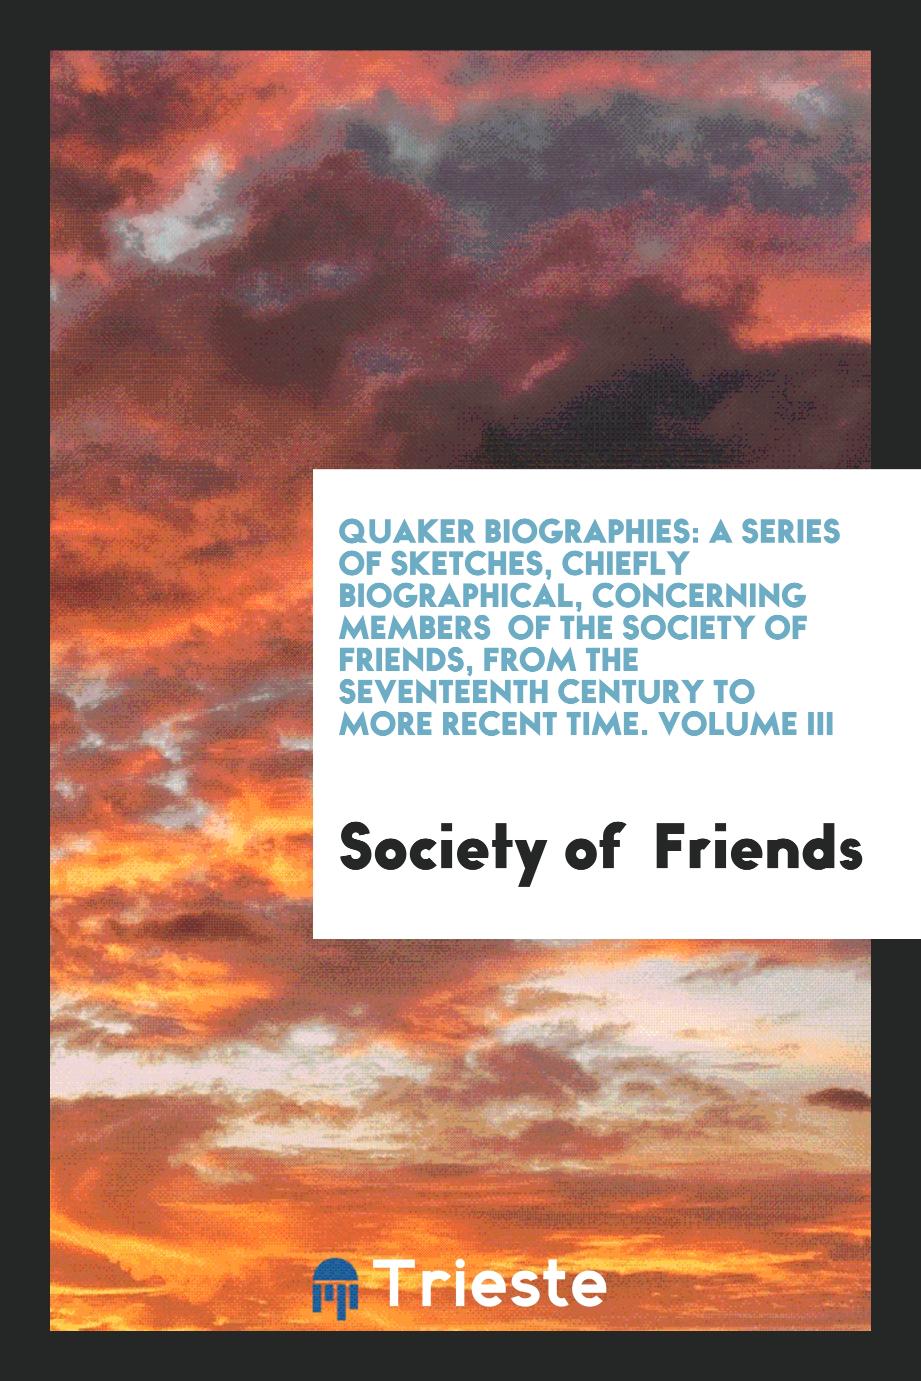 Quaker Biographies: A Series of Sketches, Chiefly Biographical, Concerning Members of the Society of Friends, from the Seventeenth Century to More Recent Time. Volume III